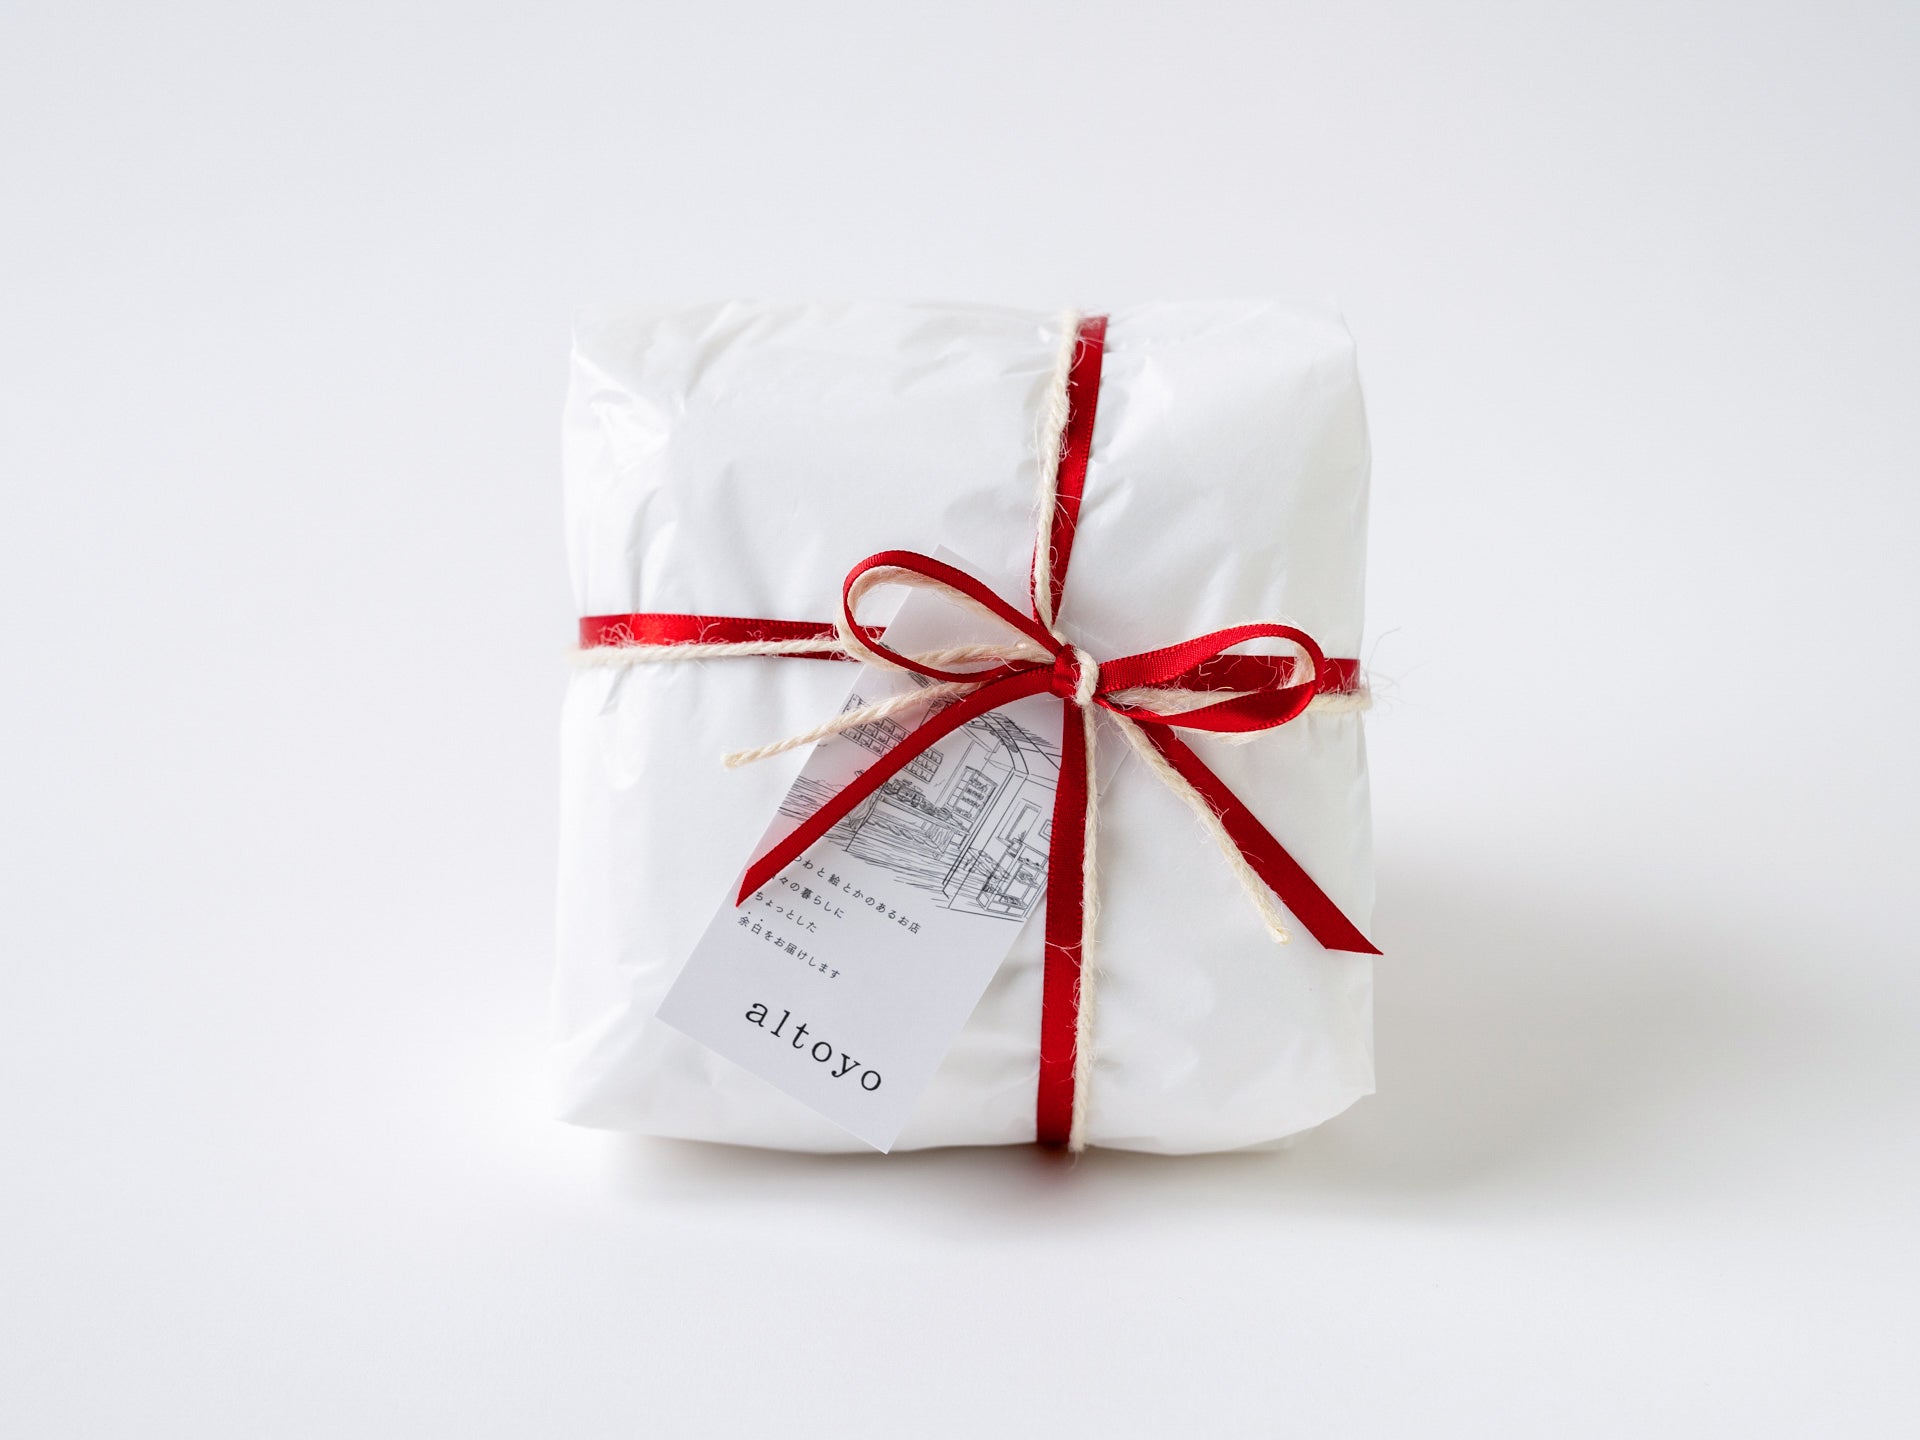 Gift wrapping (if you would like it, please add it to your cart along with the utensils) 